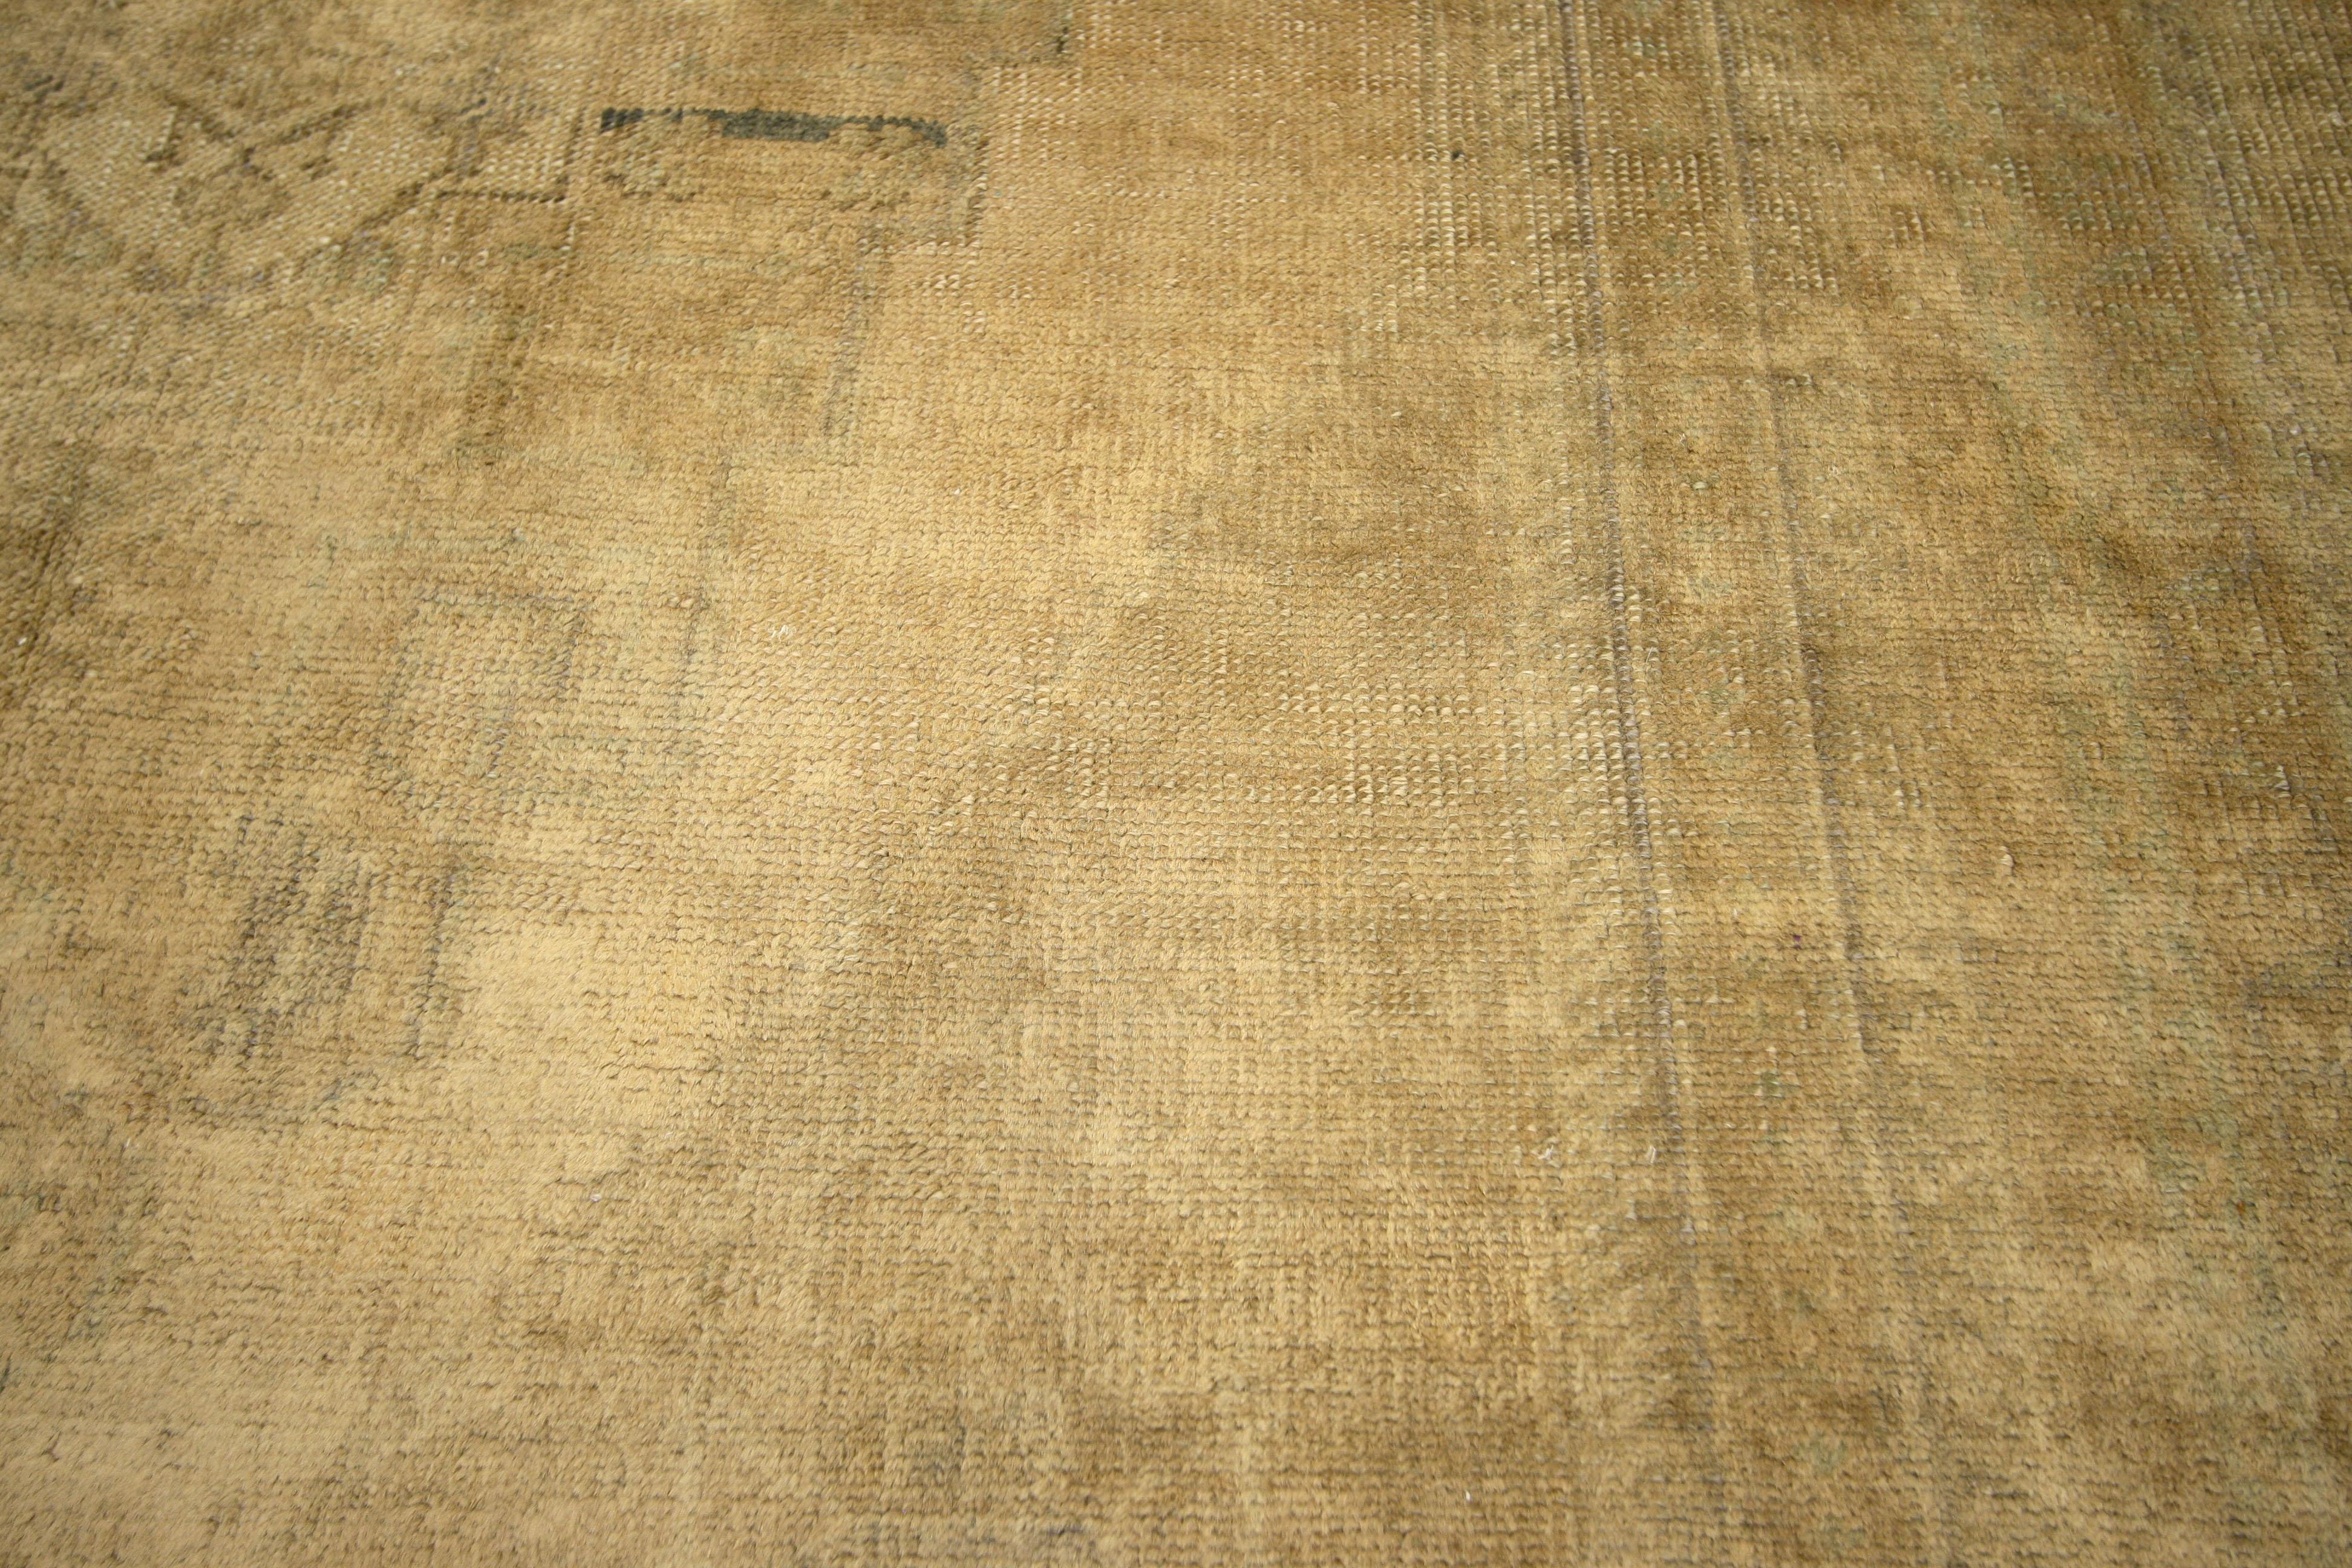 Vintage Turkish Oushak Gallery Rug with Amish Shaker Style in Earth-Tone Colors In Good Condition For Sale In Dallas, TX